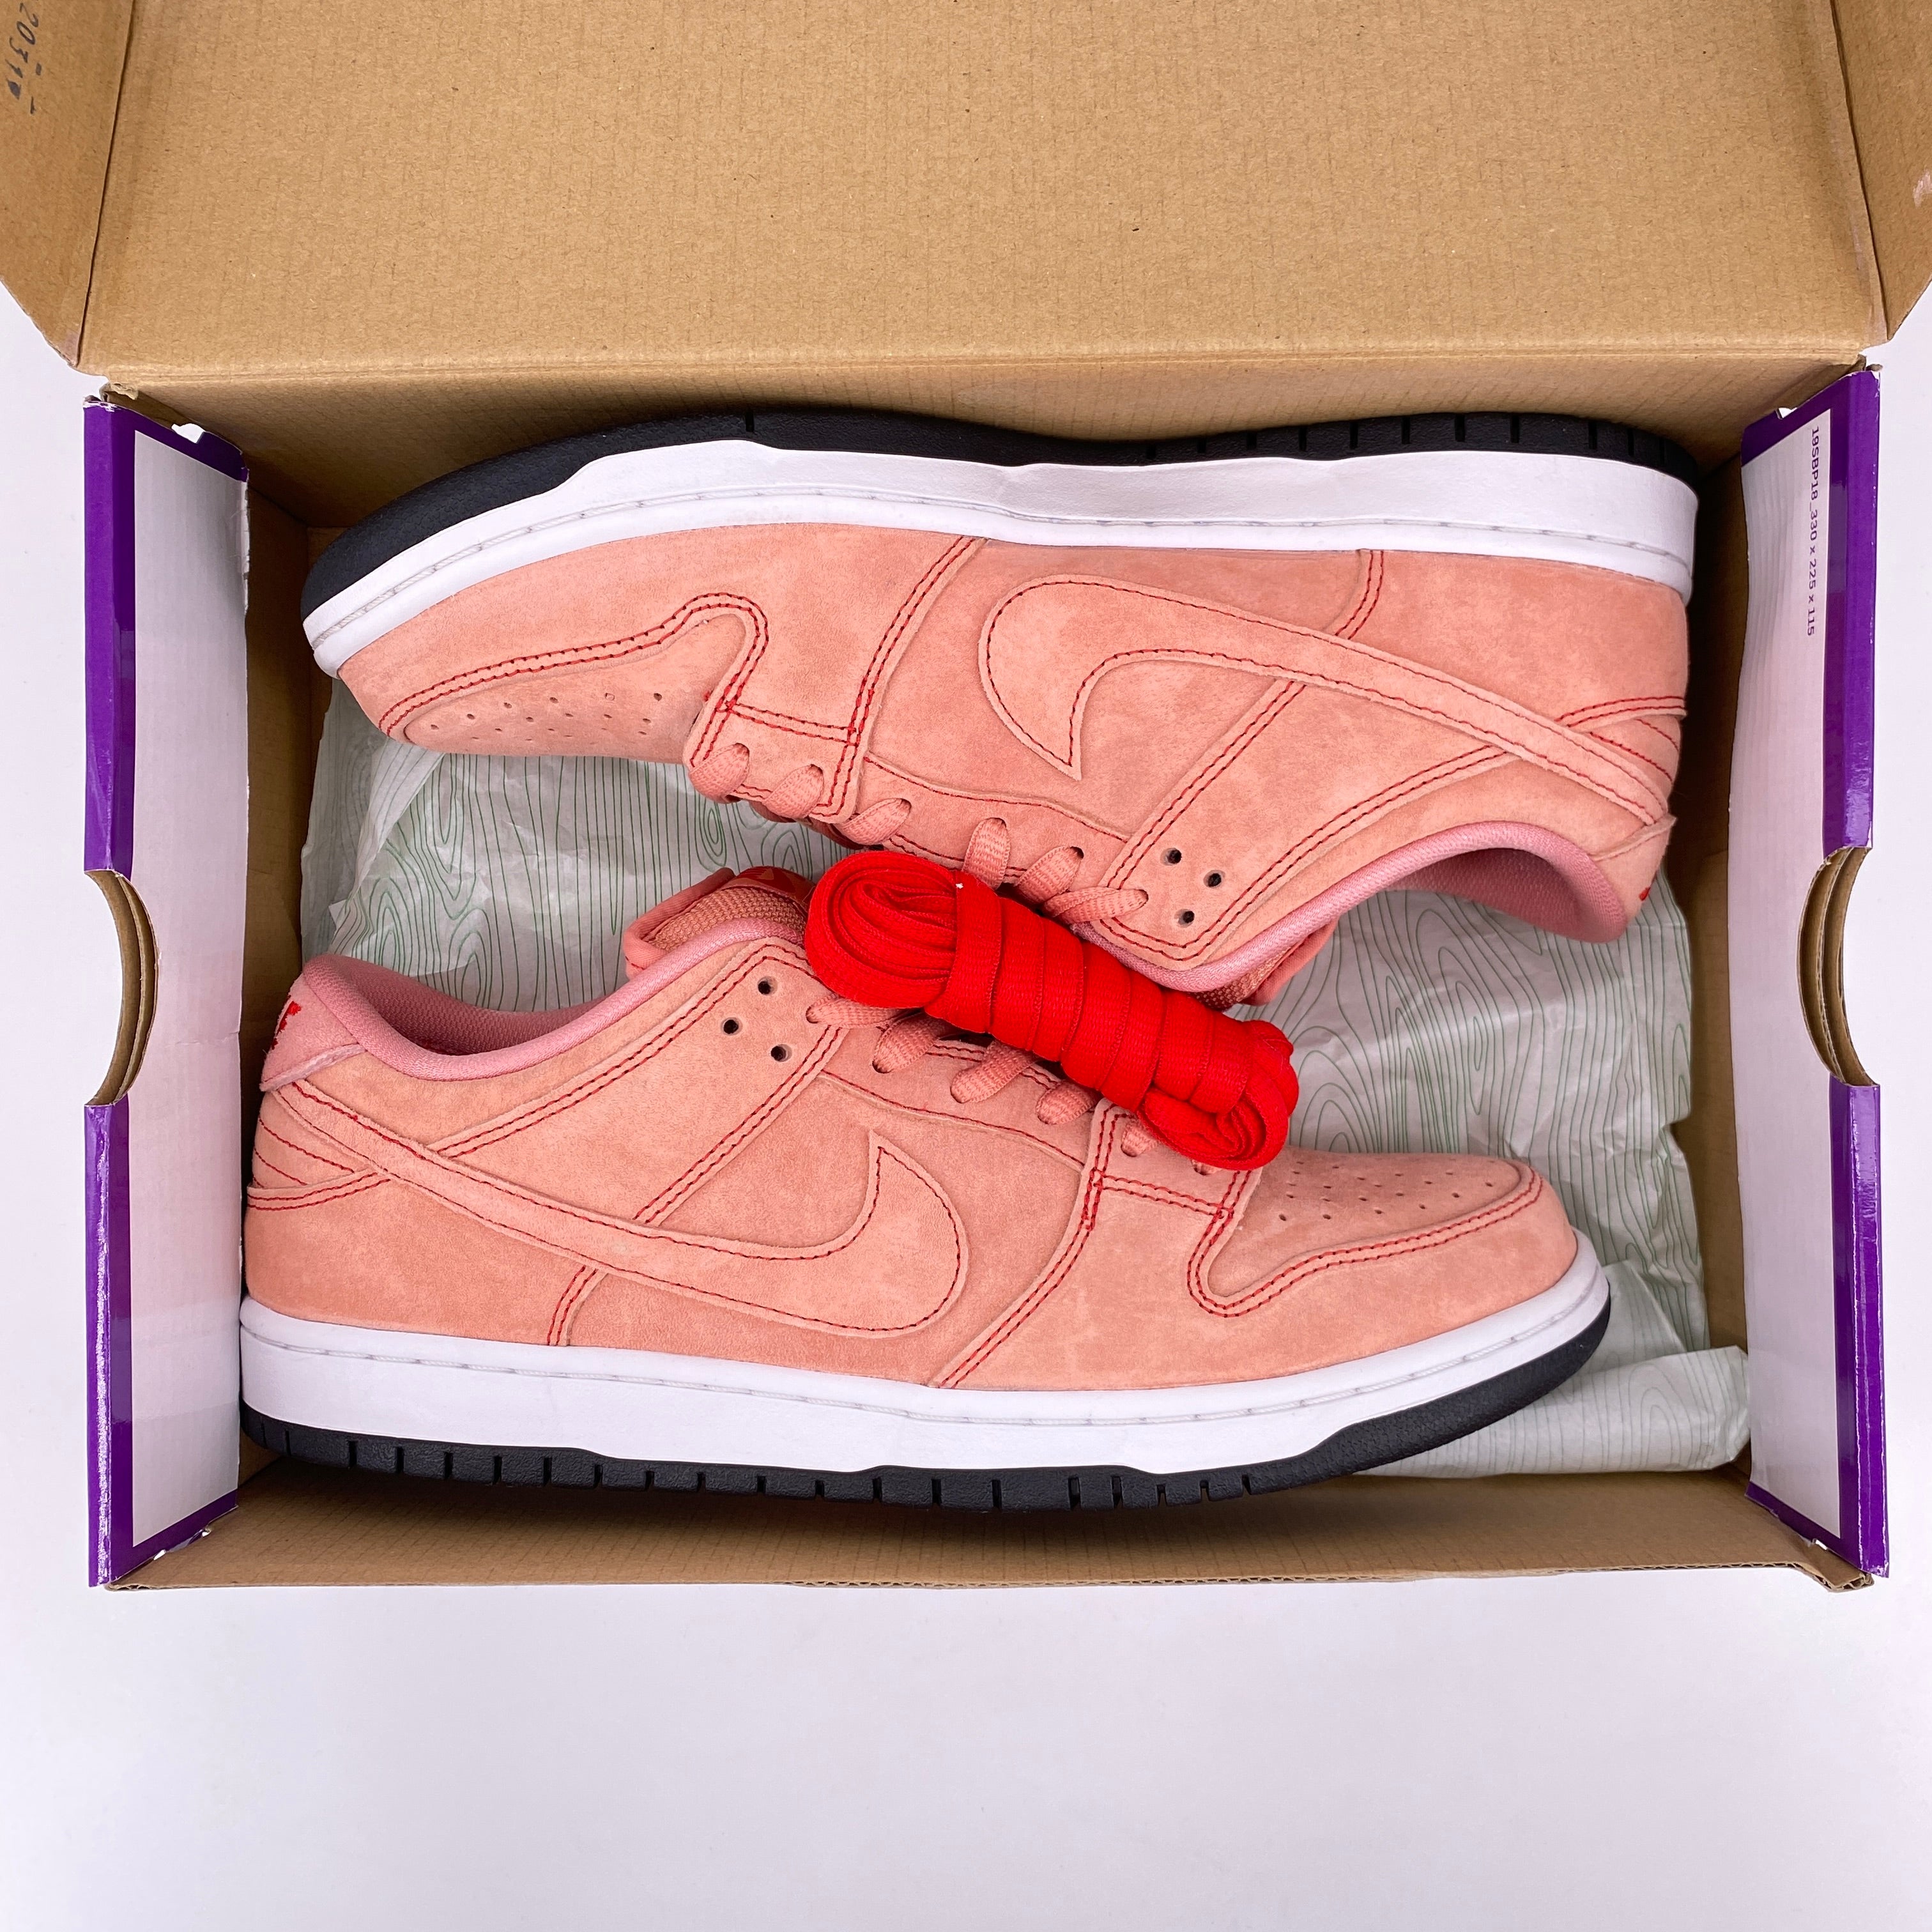 Nike SB Dunk Low &quot;Pink Pig&quot; 2021 Used Size 10